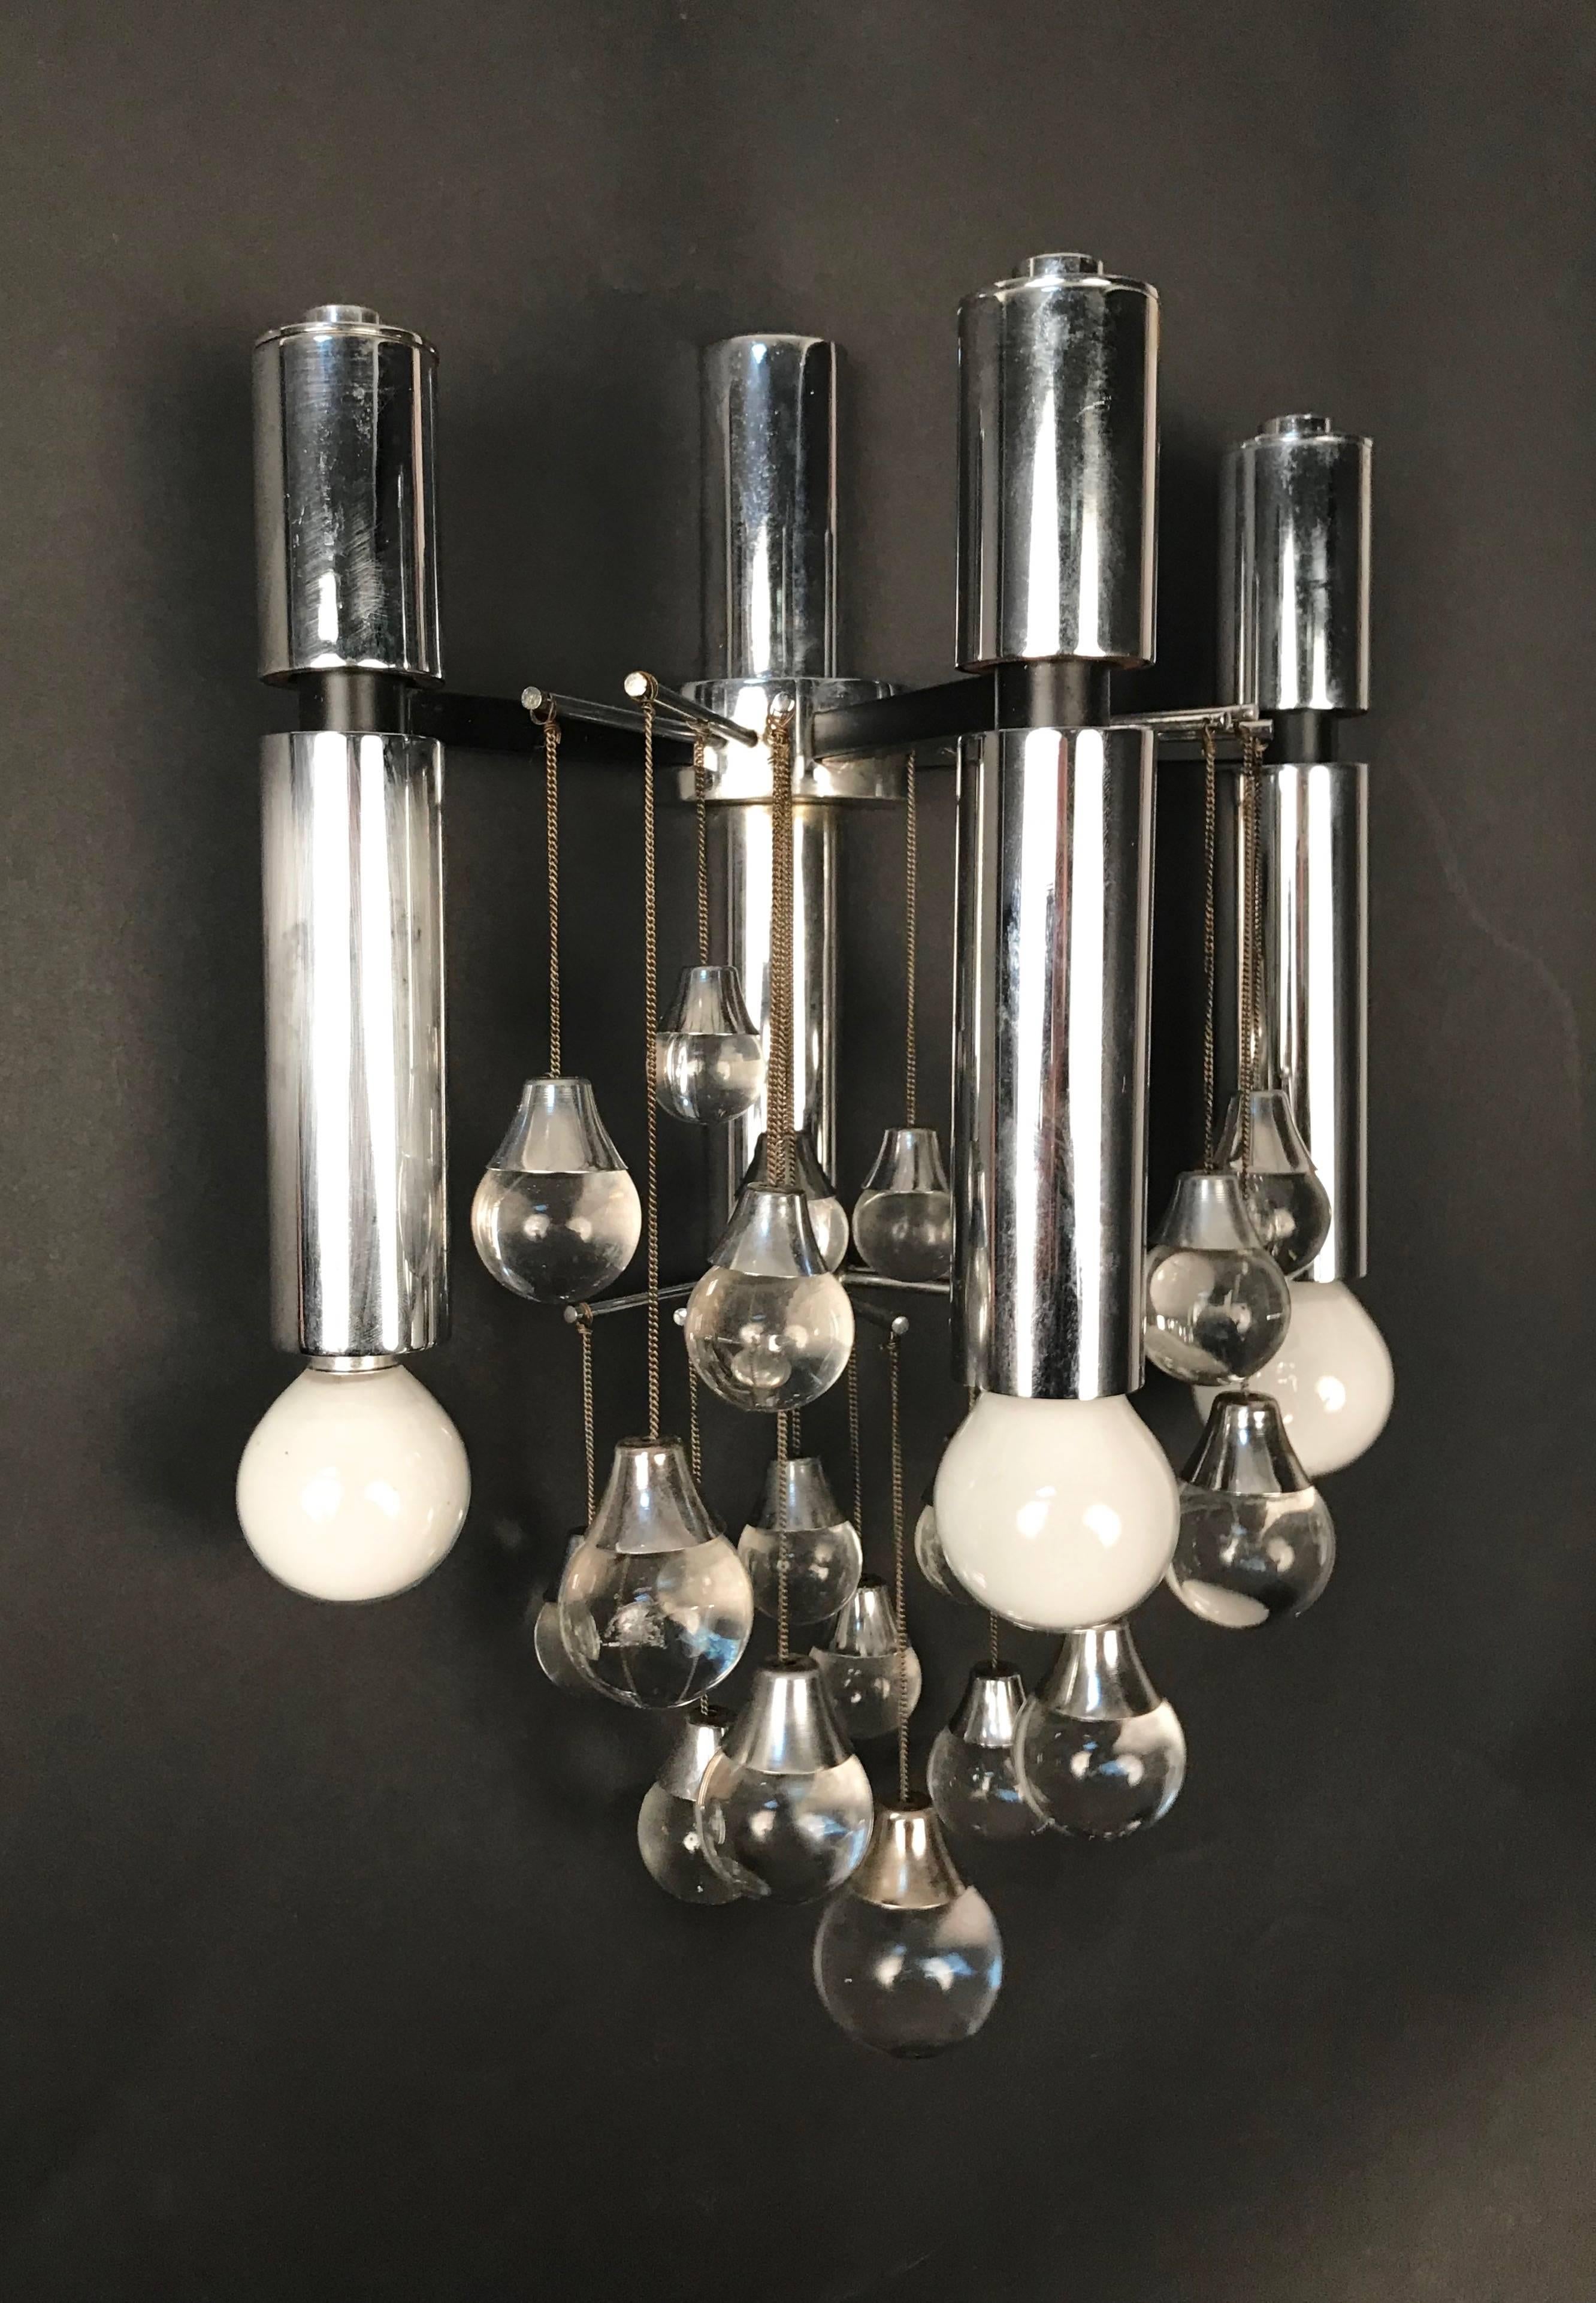 Pair of Sciolari Chrome and Glass Italian Sconces with Three Lights, 1960s For Sale 13